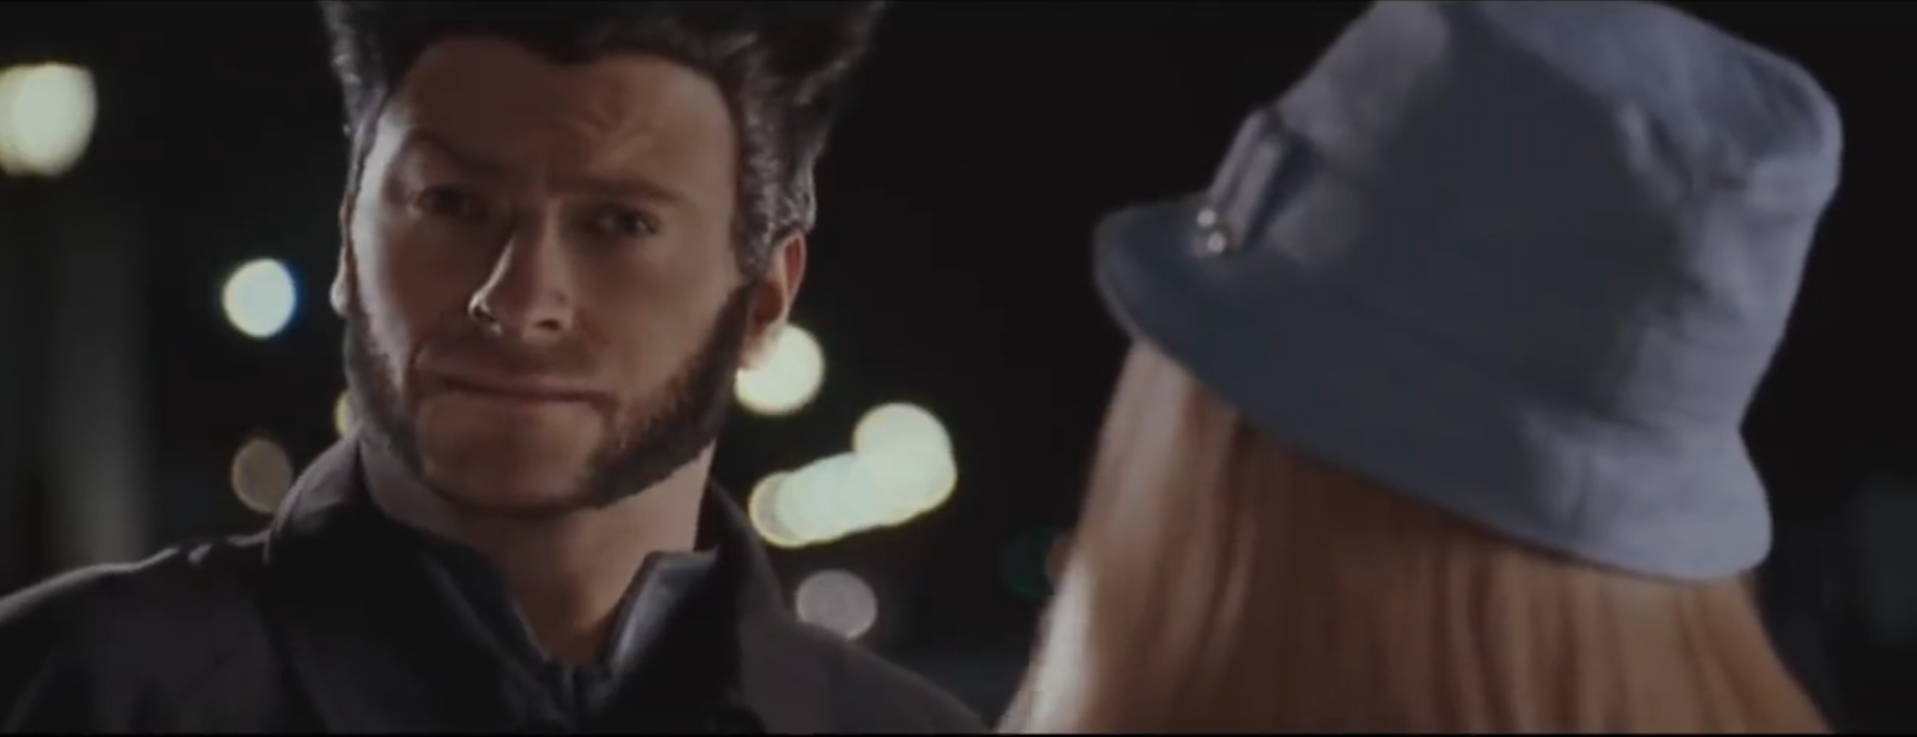 Deleted Fantastic Four (2005) Movie Wolverine Cameo Circulates Online